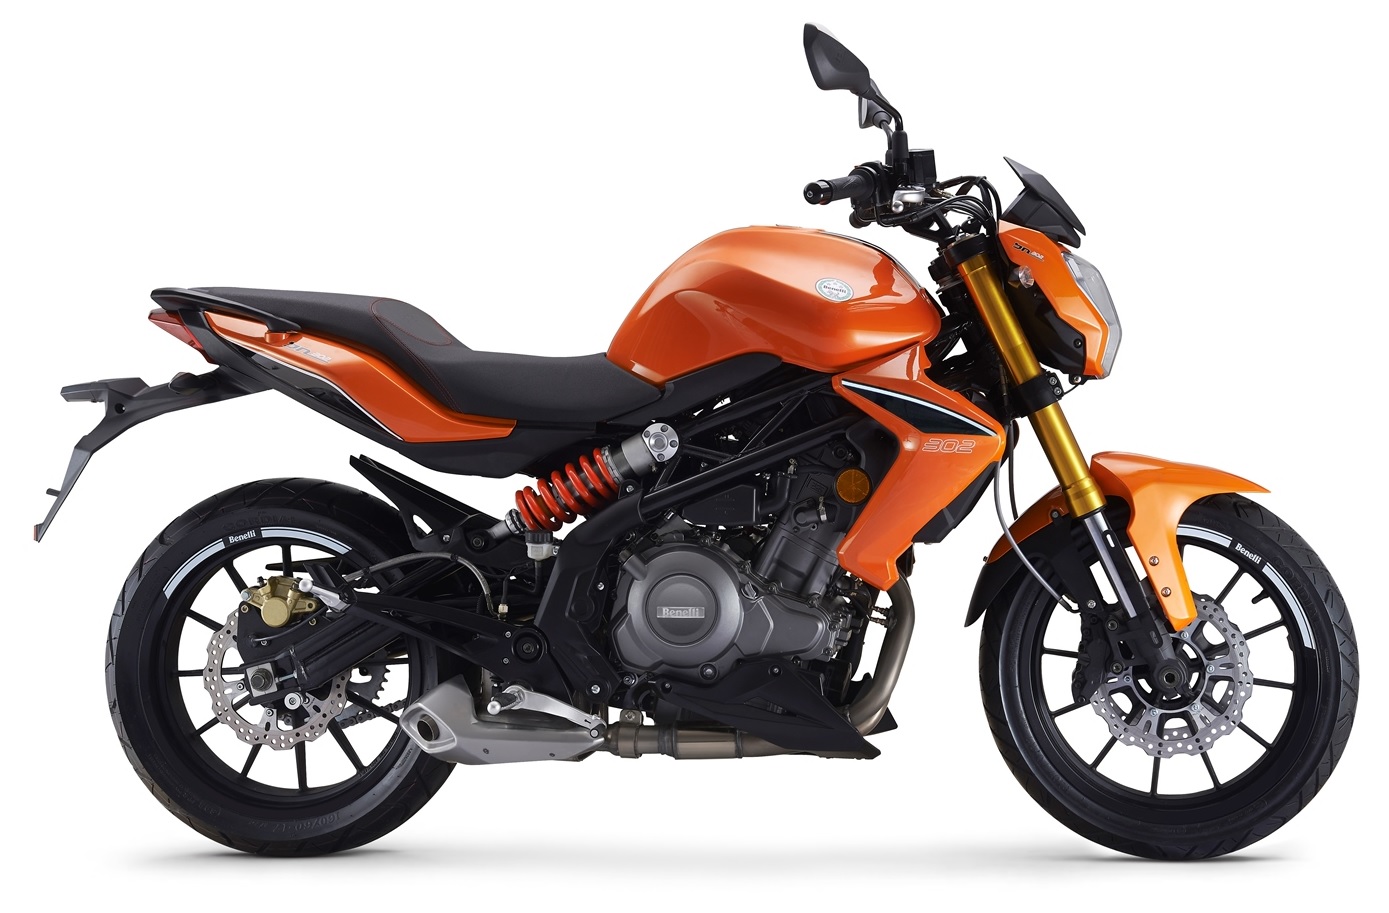 List of all 5 Benelli Bikes Coming to India: Starts From 300cc